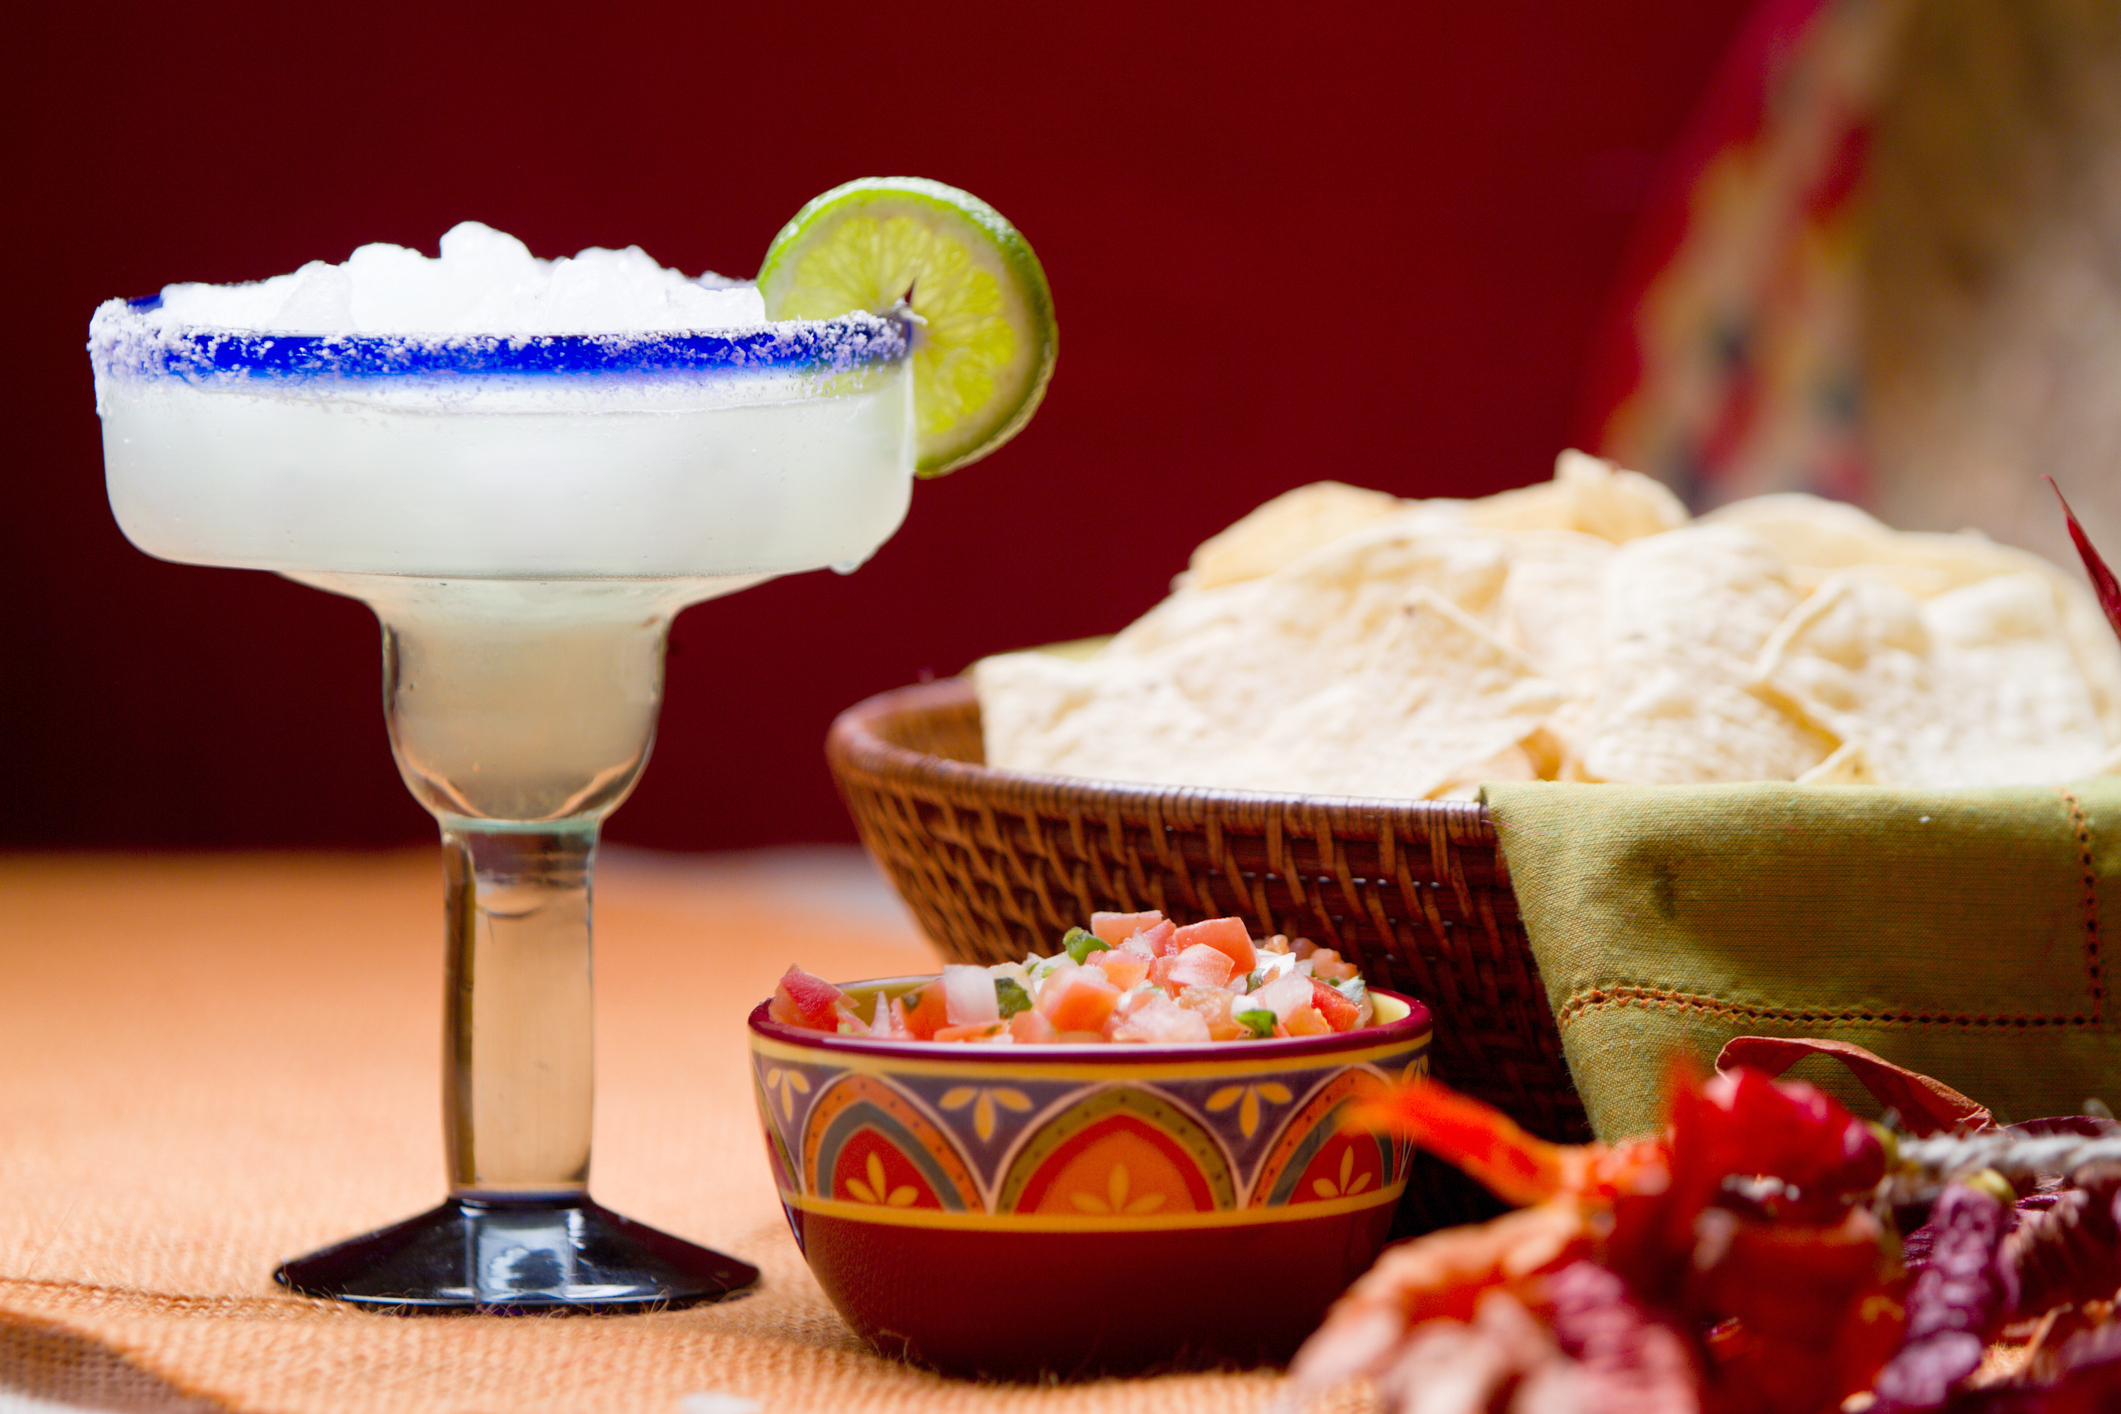 Traditional Mexican Chips, Salsa and Frozen Margarita with salt and lime on the rim of the glass on a table with Mexican decor.